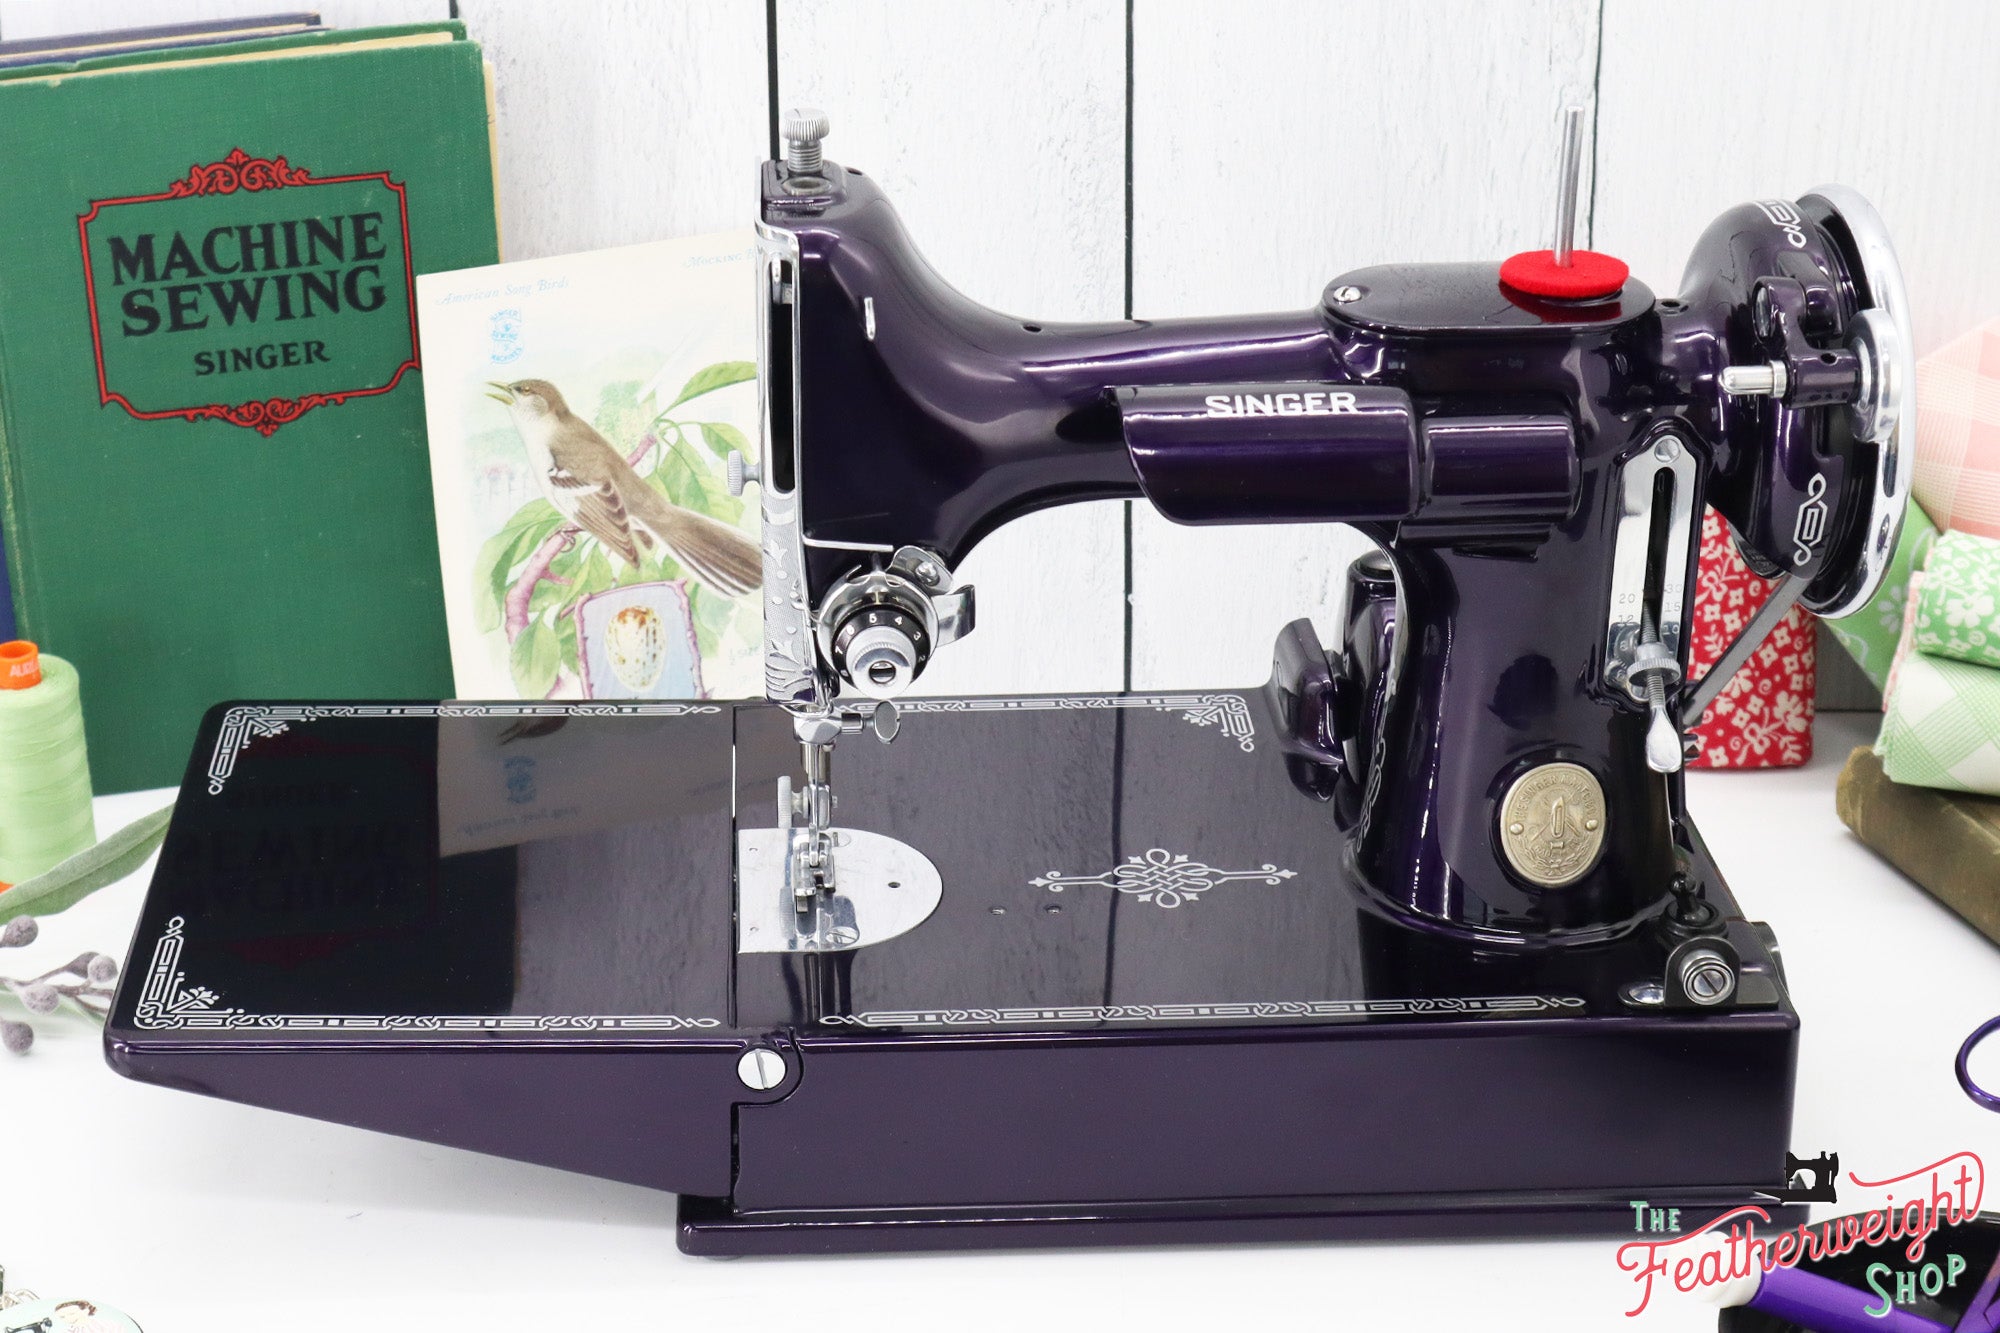 Singer Featherweight 221 Centennial Sewing Machine For Sale – The Singer  Featherweight Shop